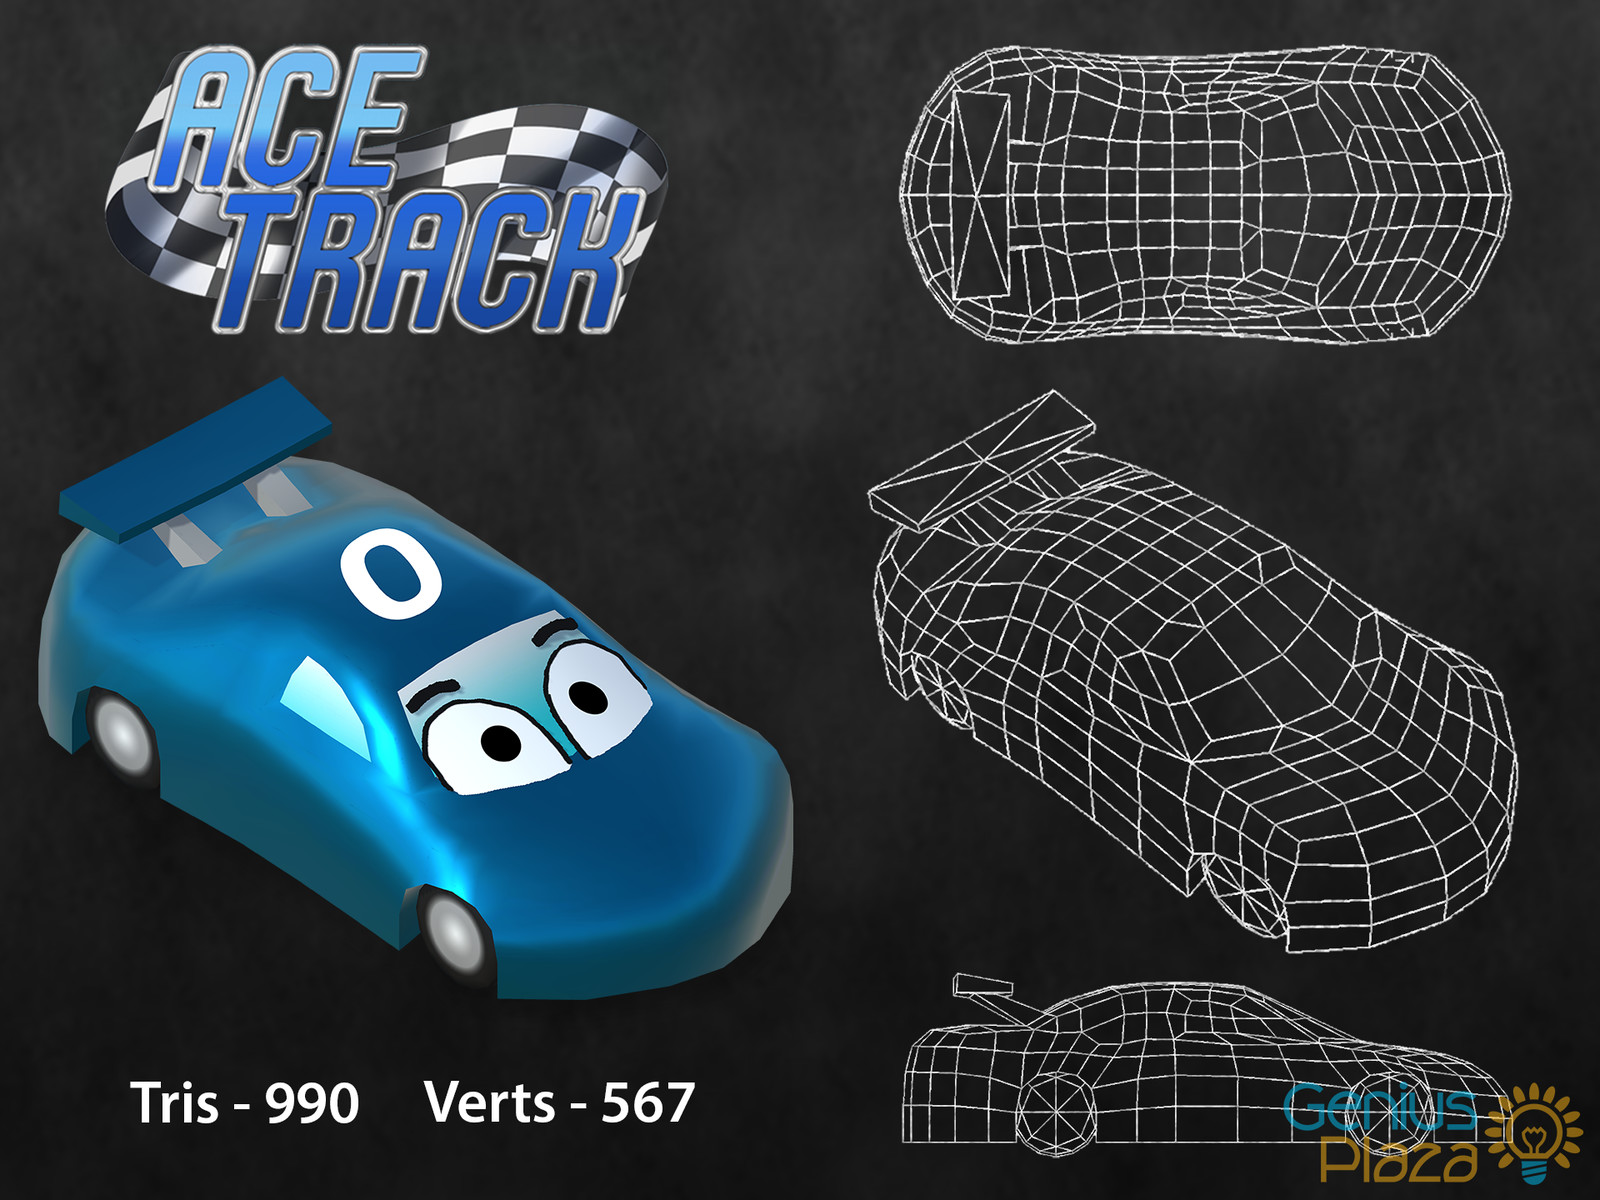 A model breakdown for the car character from AceTrack. A racing game where players answer questions from educational resources to get ahead of their competition on the track.